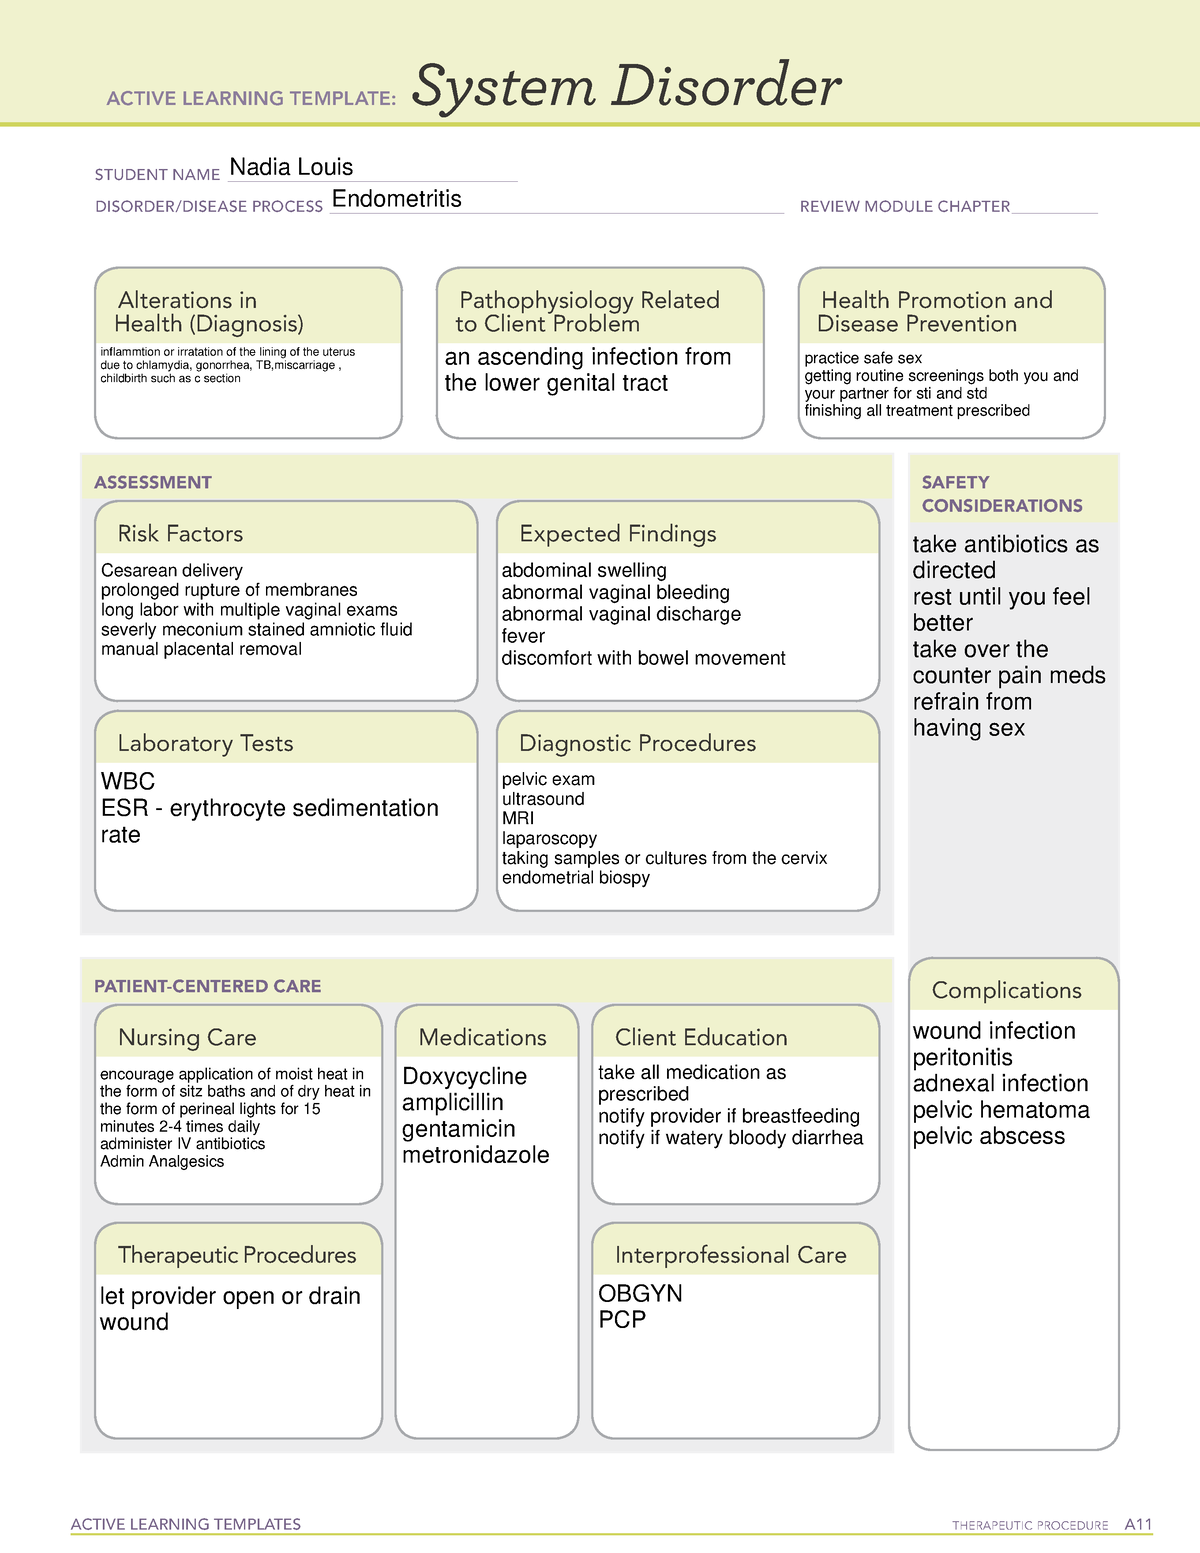 endometritis-system-disorder-ati-template-active-learning-templates-therapeutic-procedure-a